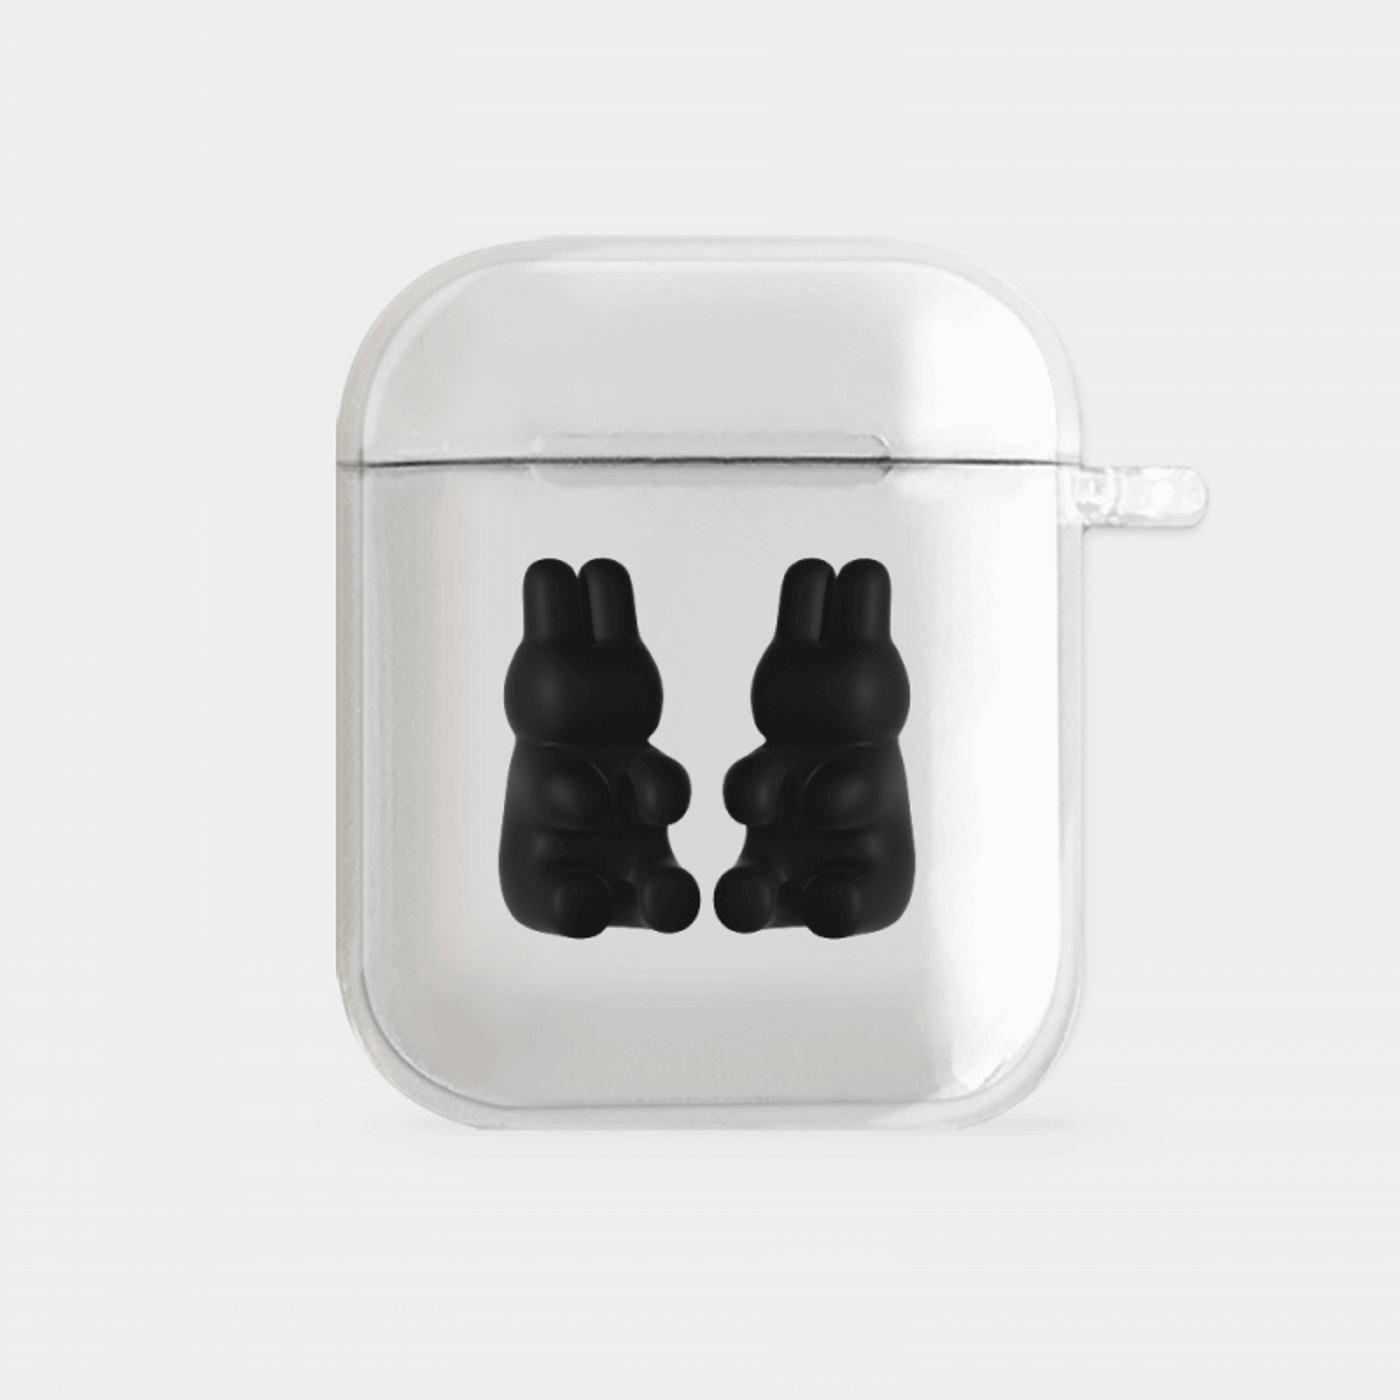 cherishable things design [clear airpods case series]